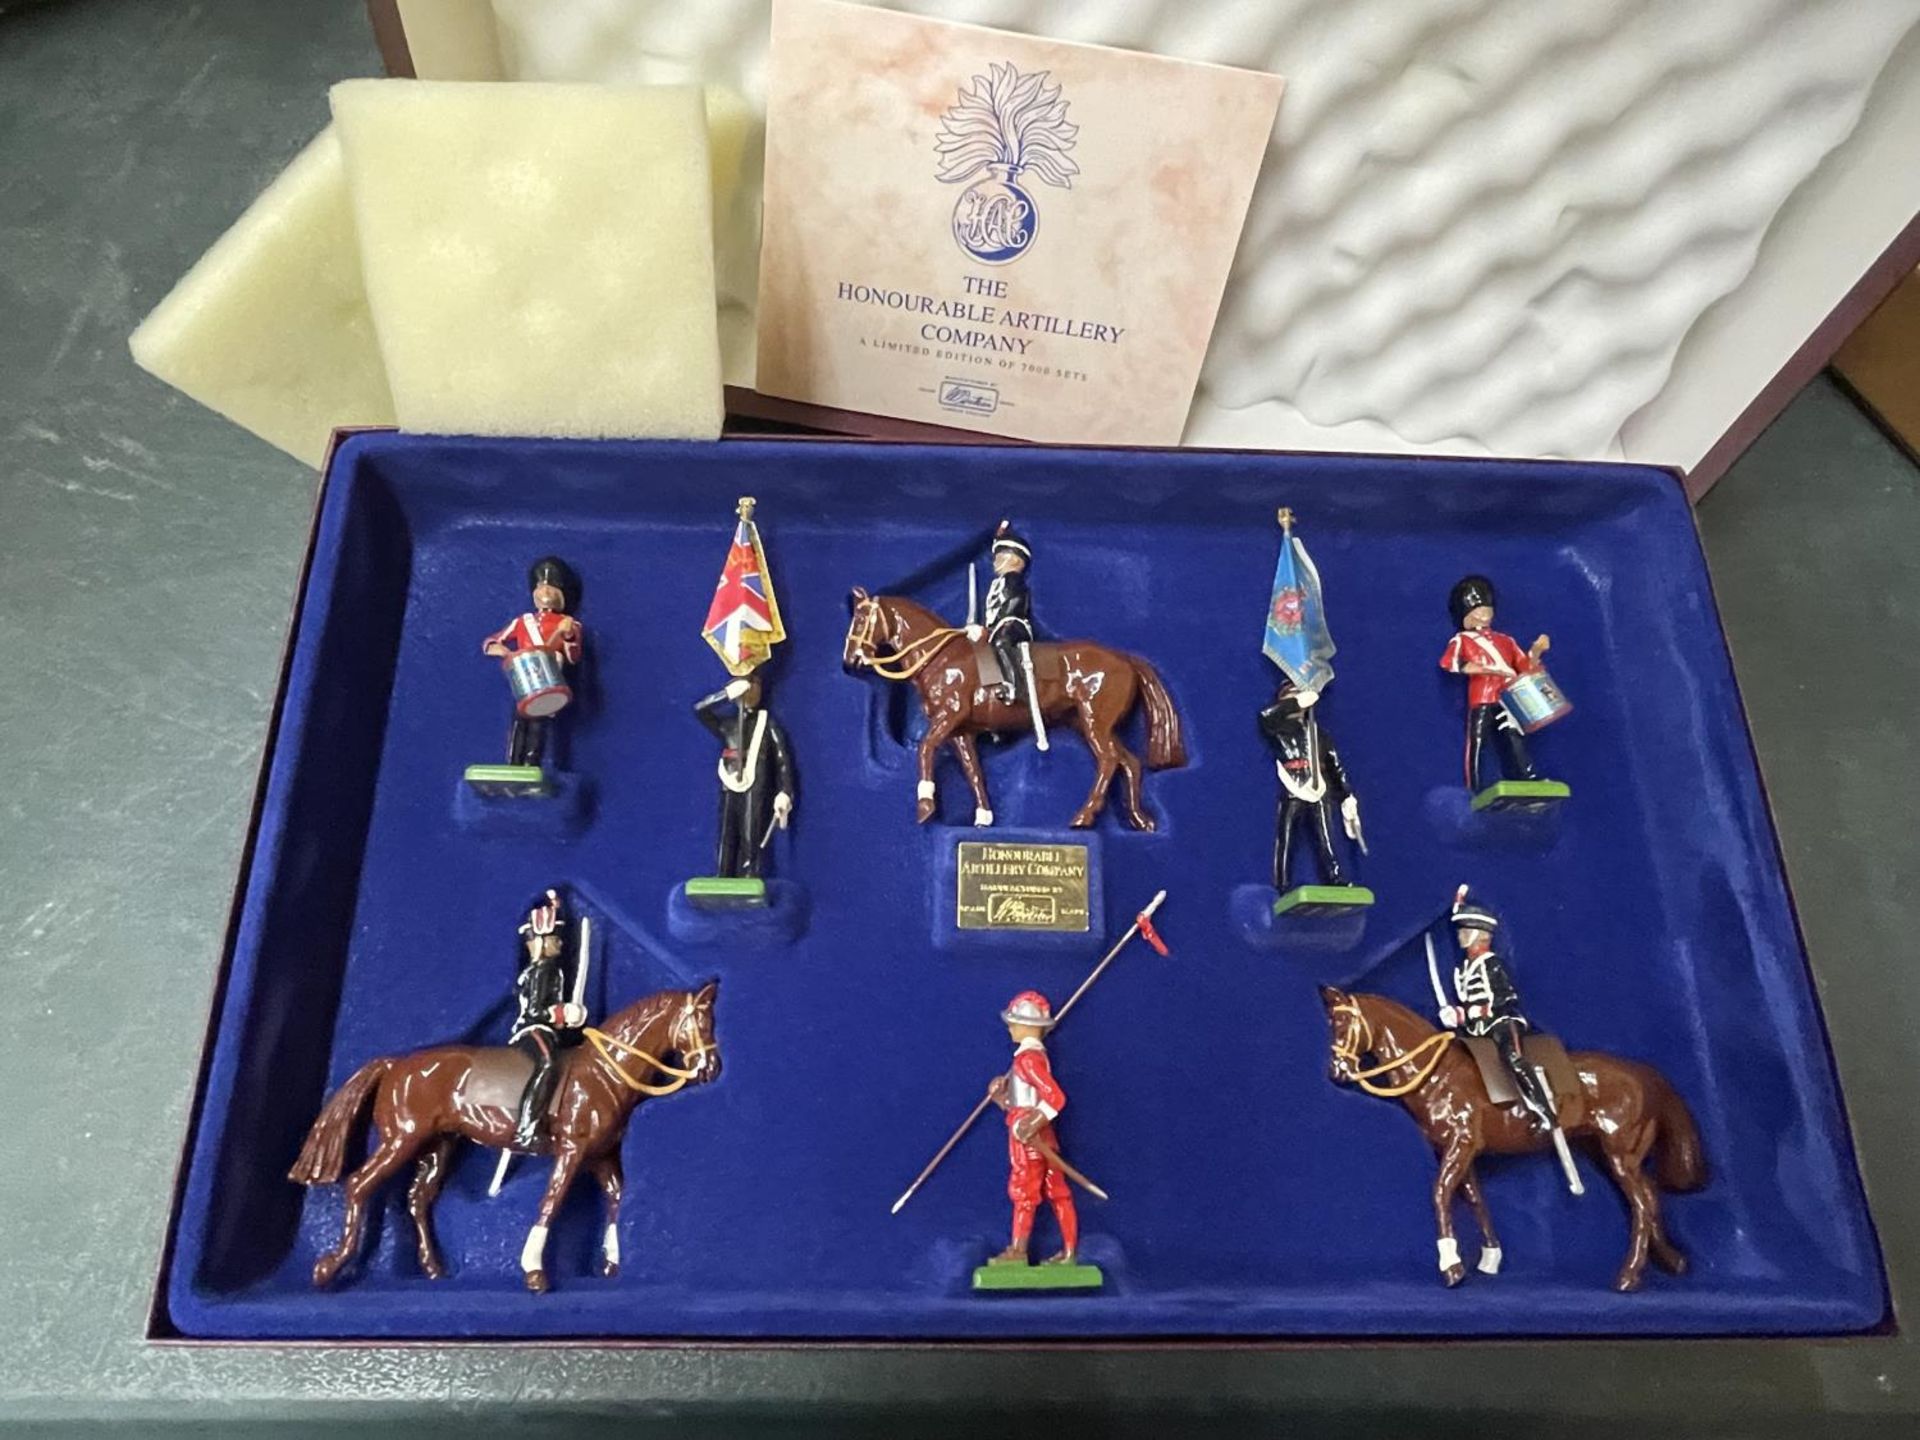 A BOXED BRITAINS TOYS LIMITED EDITION HONOURABLE ARTILLERY COMPANY MODEL SET, NO.2344 OF 7000 SETS - Image 2 of 3